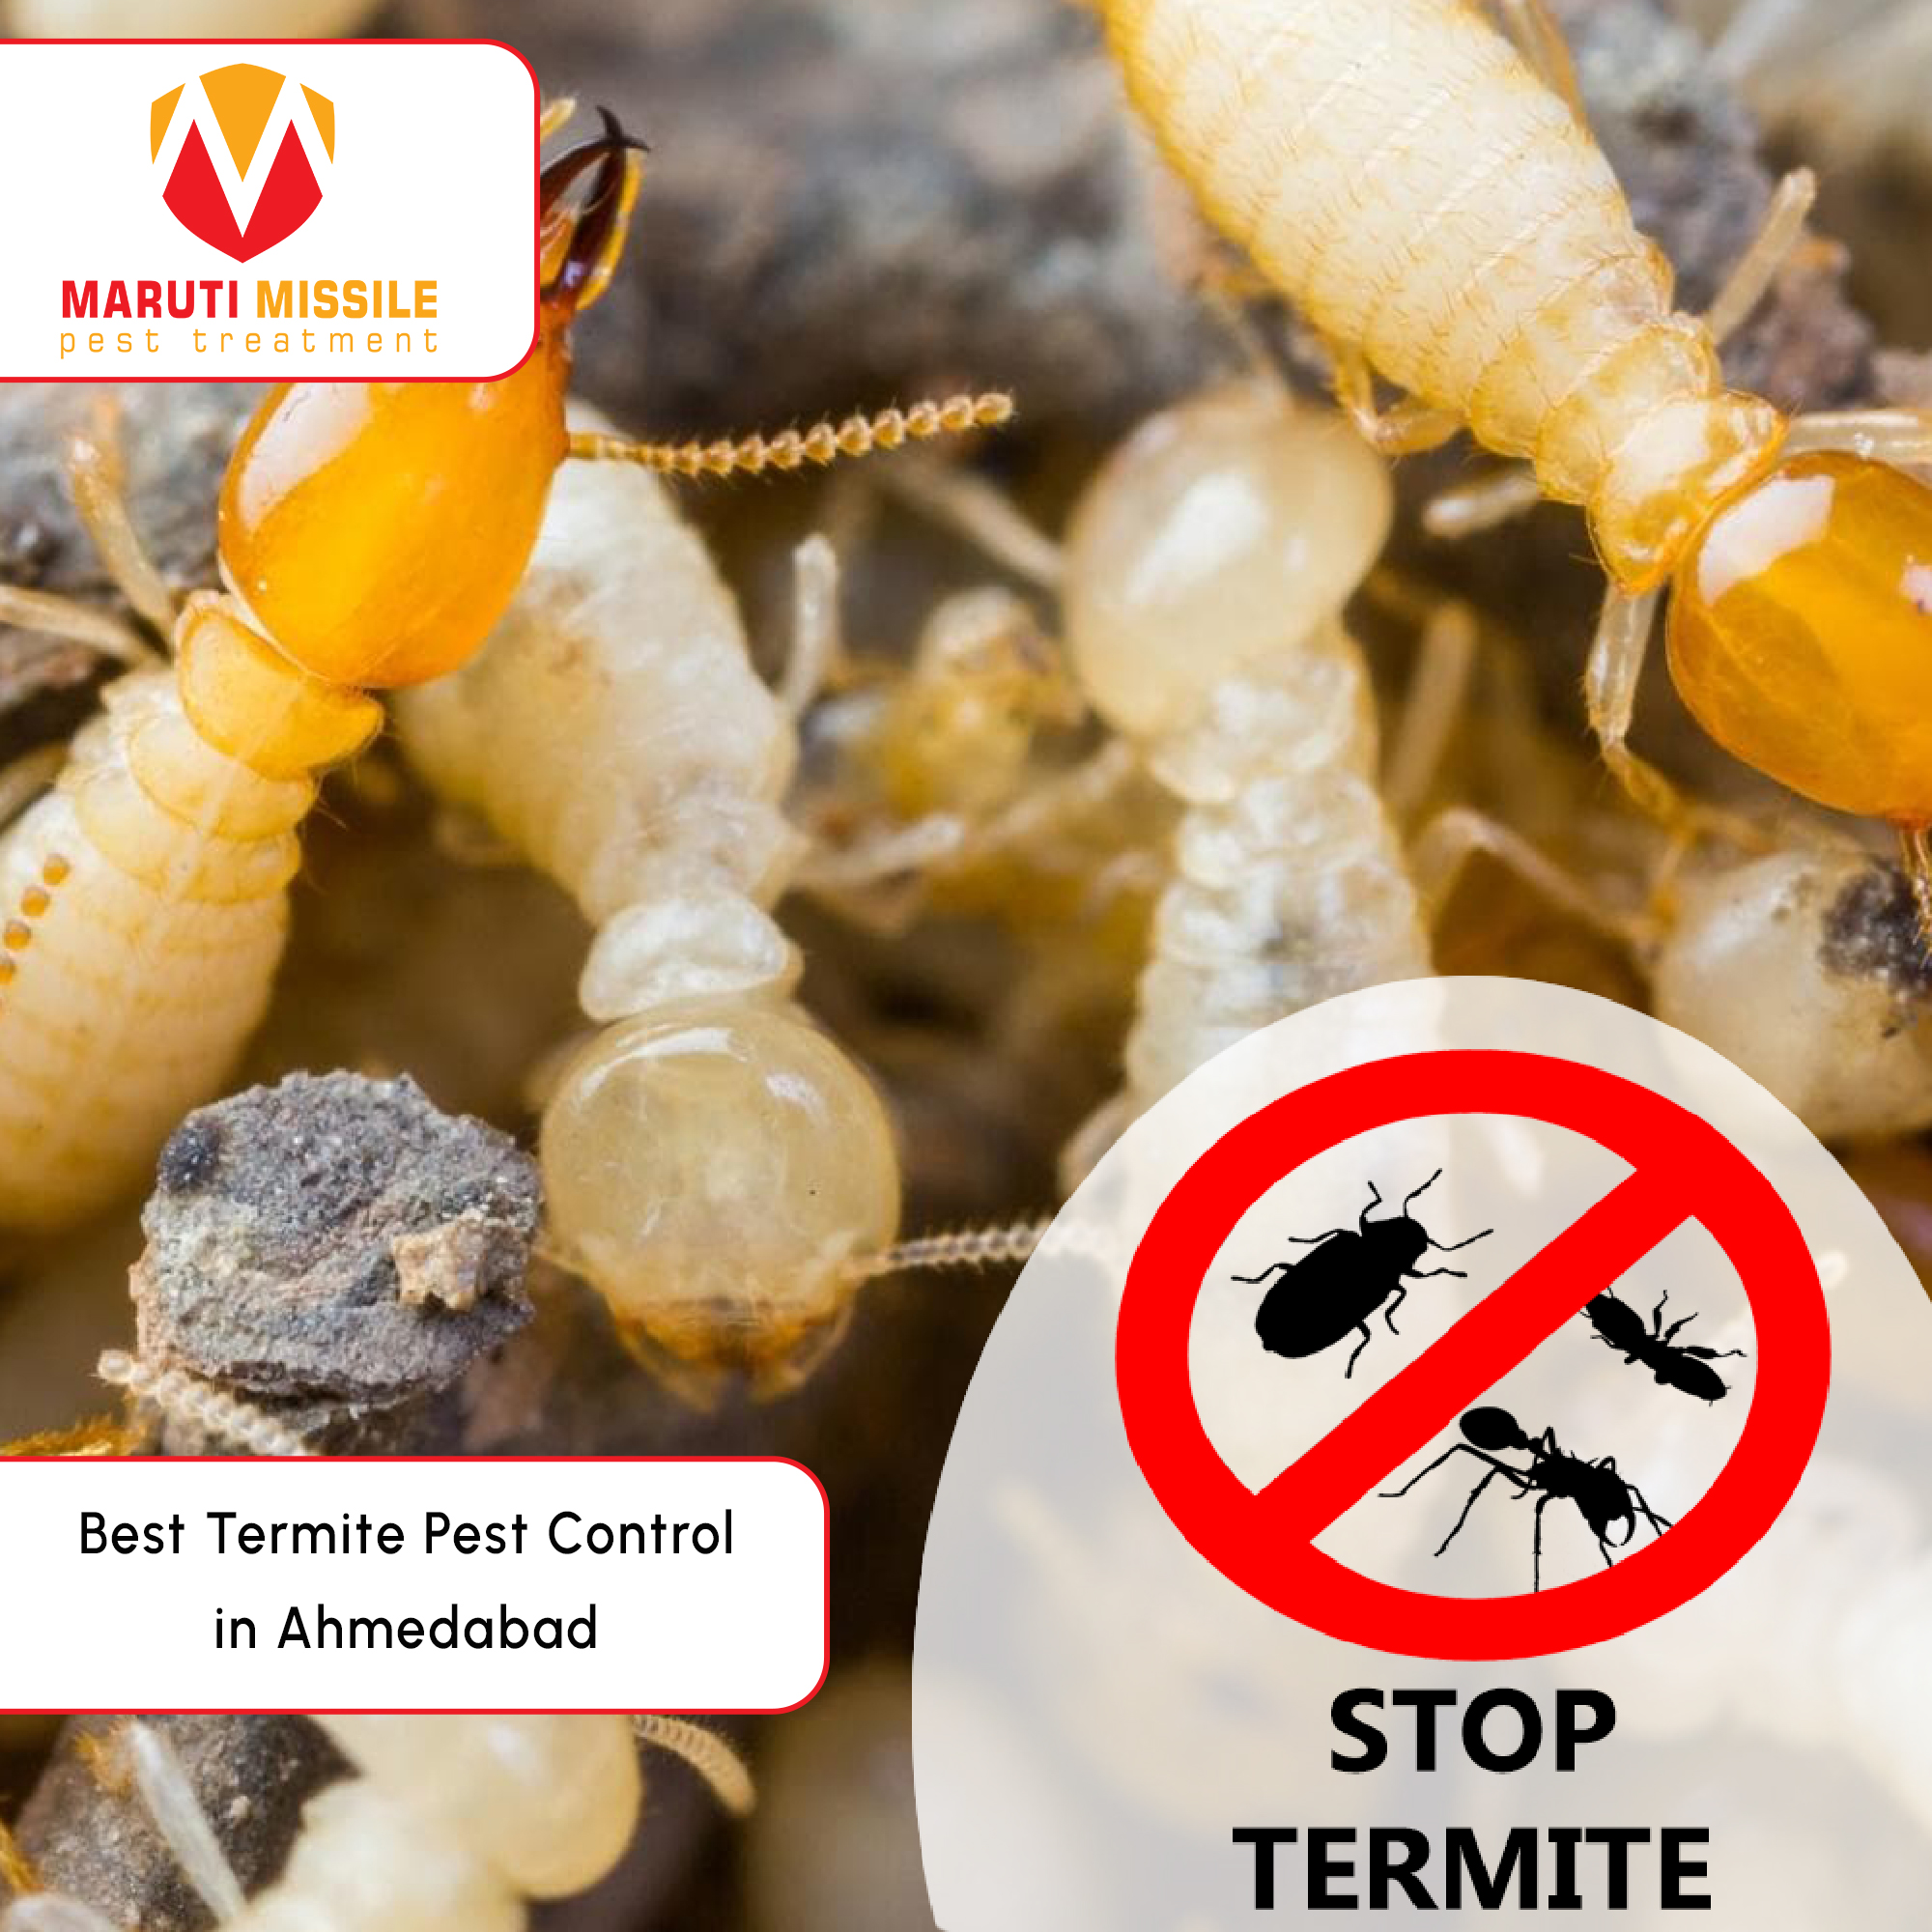 Pest Control Company in Ahmedabad